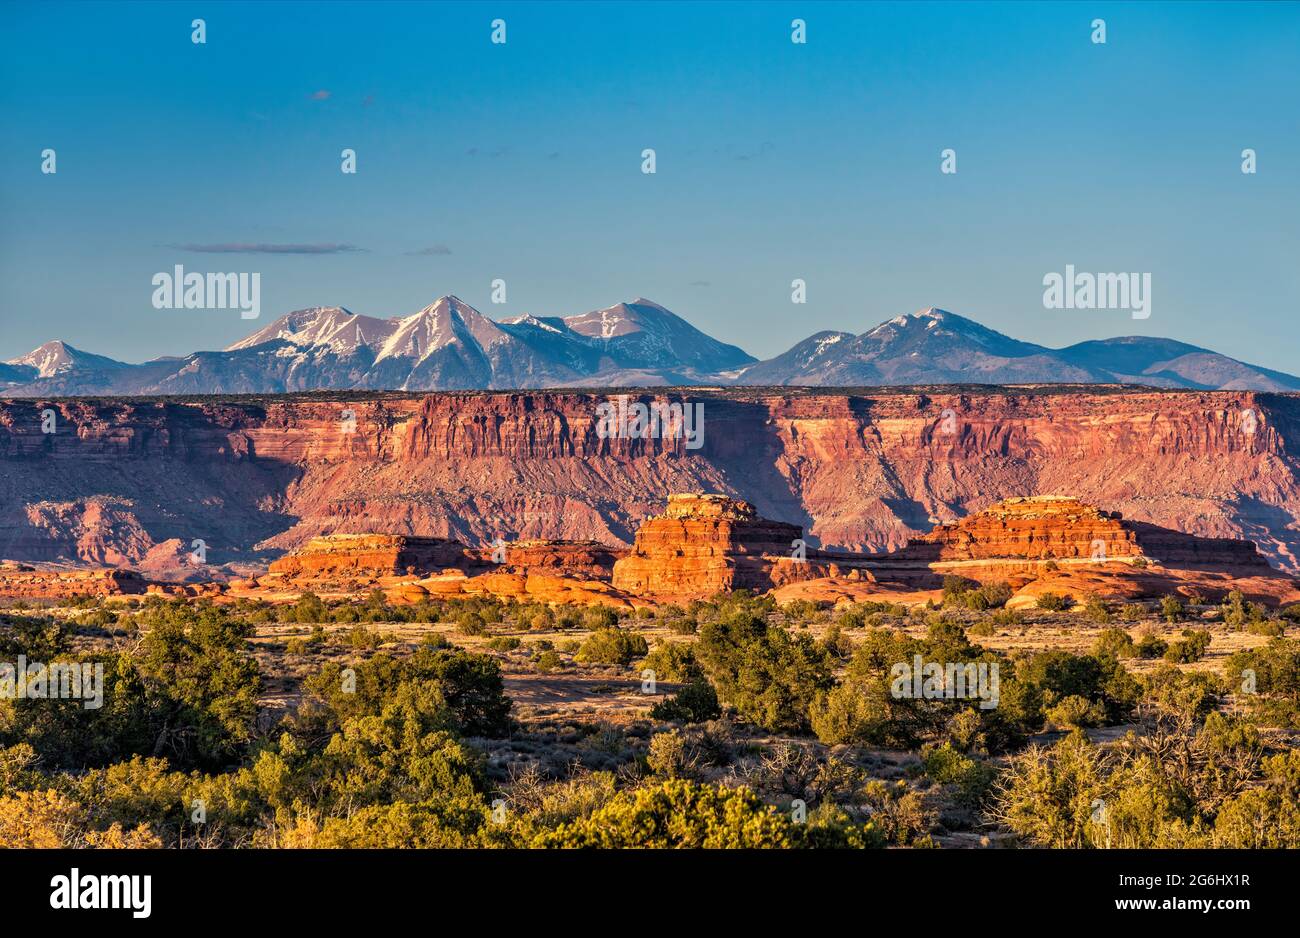 Squaw Flat, Horsehead Rock plateau, La Sal Mountains in dist, view from Spring Canyon Road, sunset, Needles District, Canyonlands Natl Park, Utah, USA Stock Photo